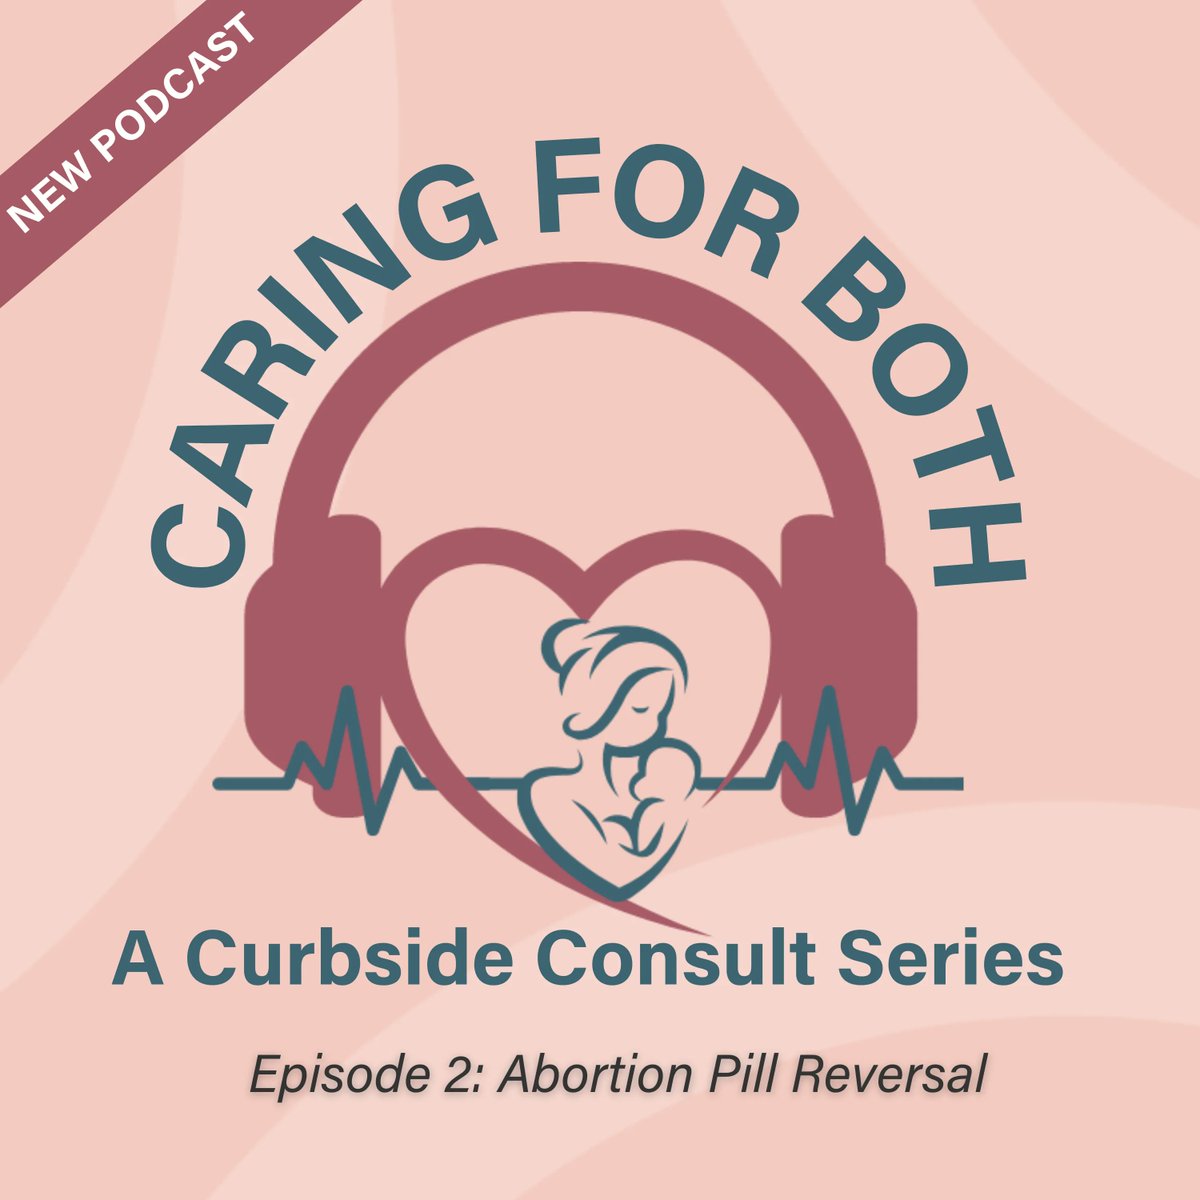 Listen to our latest podcast episode today! Dr. George Delgado discusses the theory, evidence, and critiques of #AbortionPillReversal, the use of natural progesterone to reverse the effects of mifepristone. Available here: buff.ly/41odl8y